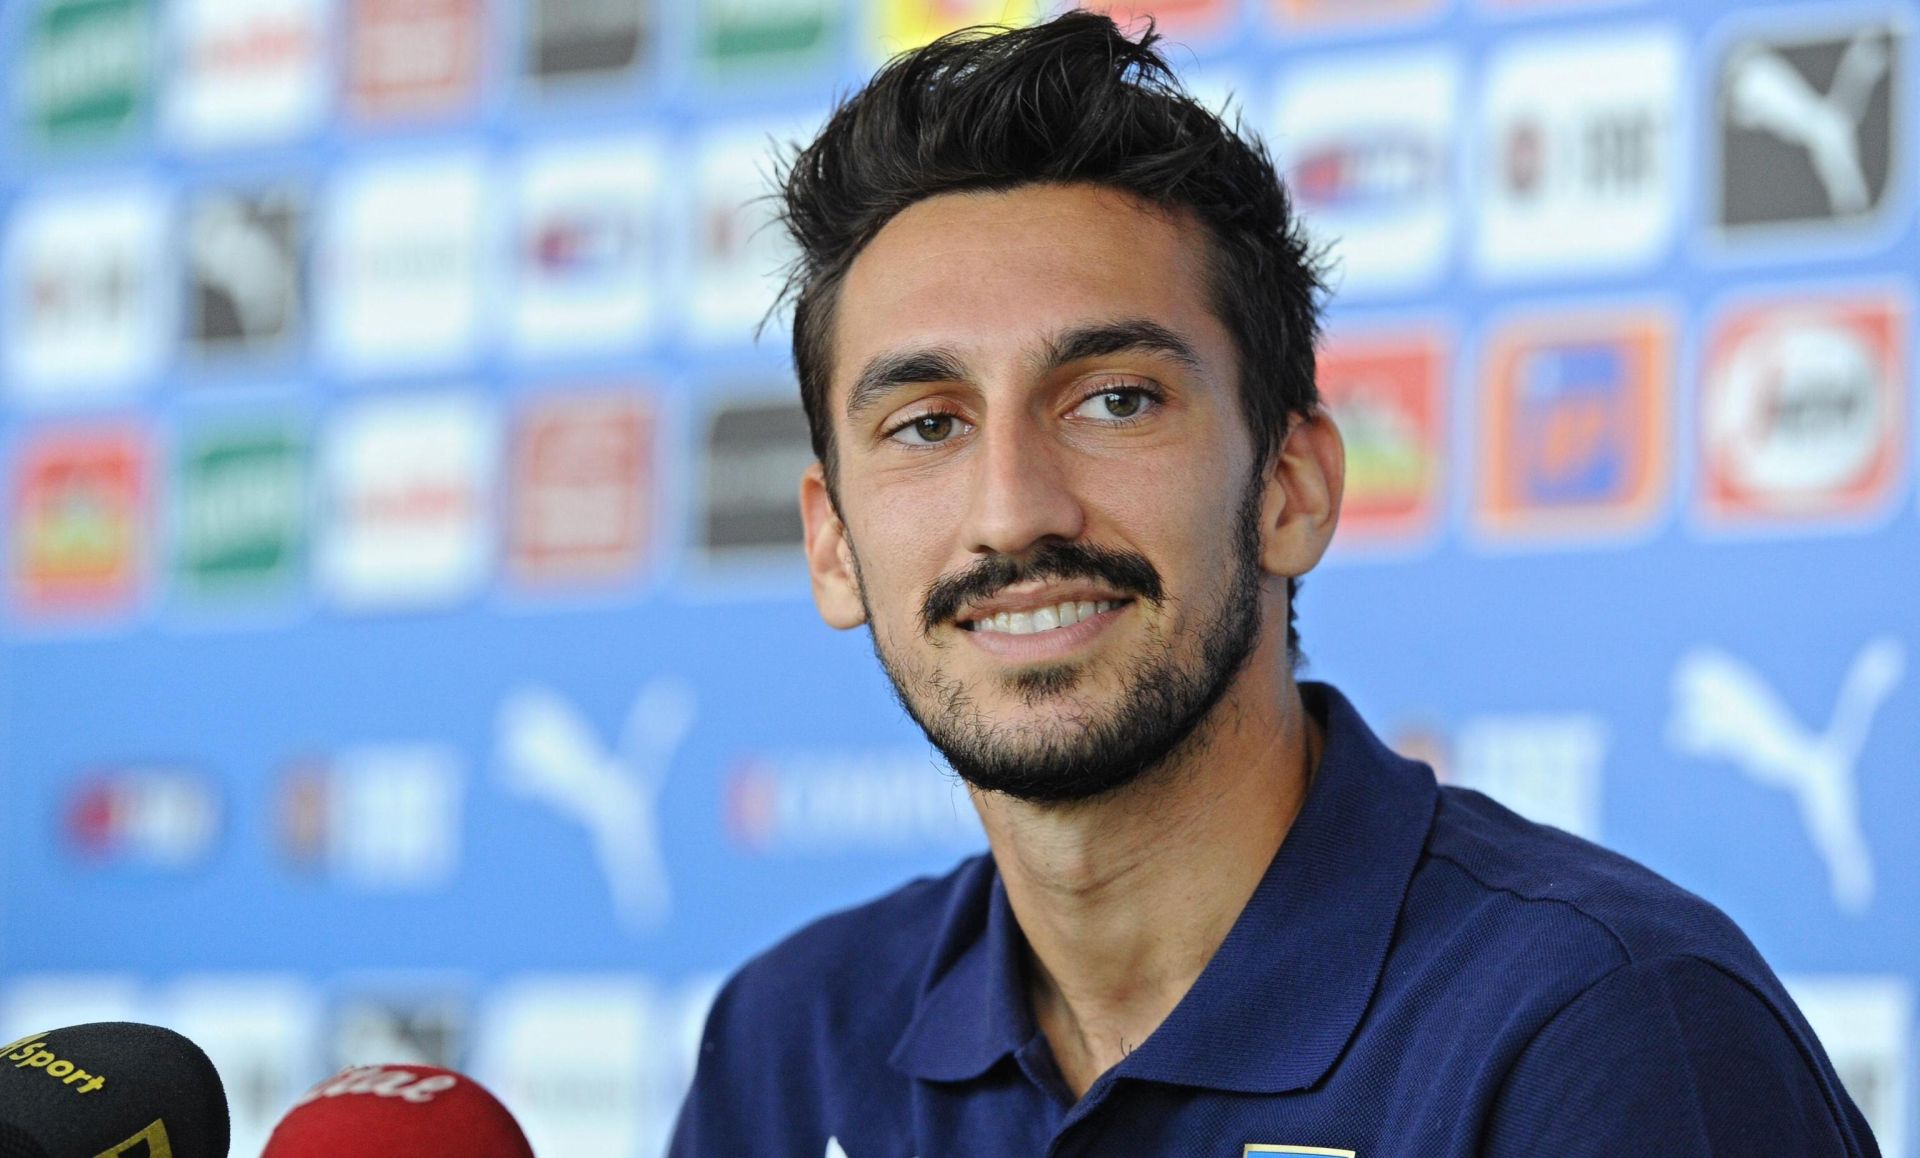 epa06578833 (FILE) Italian defender Davide Astori attends a press conference of the Italian national soccer team in Coverciano, Italy, 07 September 2014 (reissued 04 March 2018). The 31-year-old Fiorentina player Astori was found dead in a hotel room.  EPA/MAURIZIO DEGL' INNOCENTI *** Local Caption *** 51557400